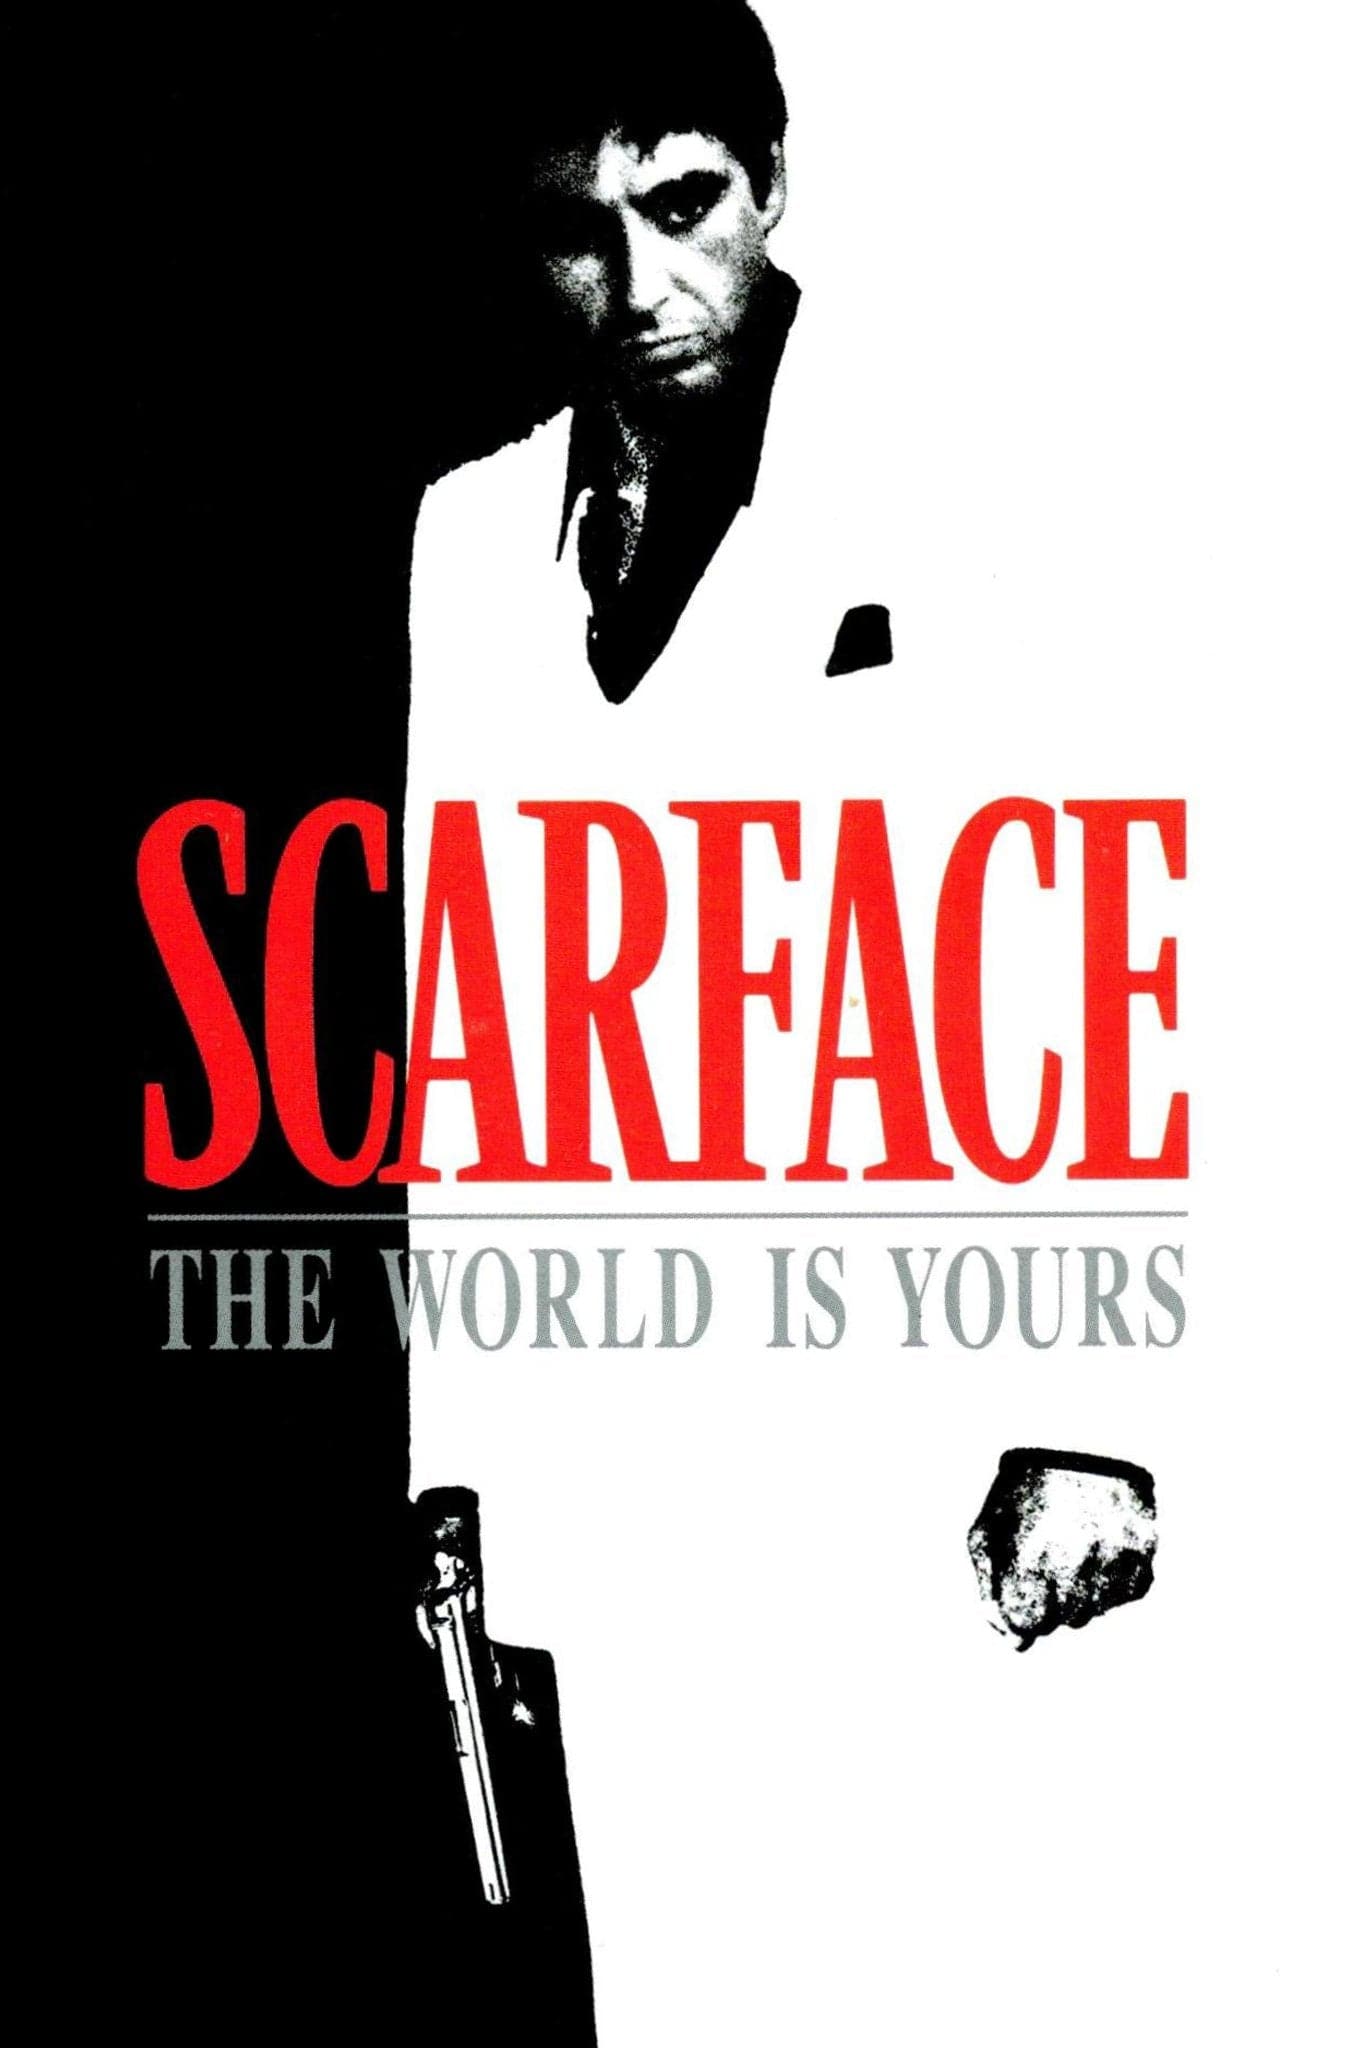 Scarface ‘The World Is Yours’ Poster - Posters Plug